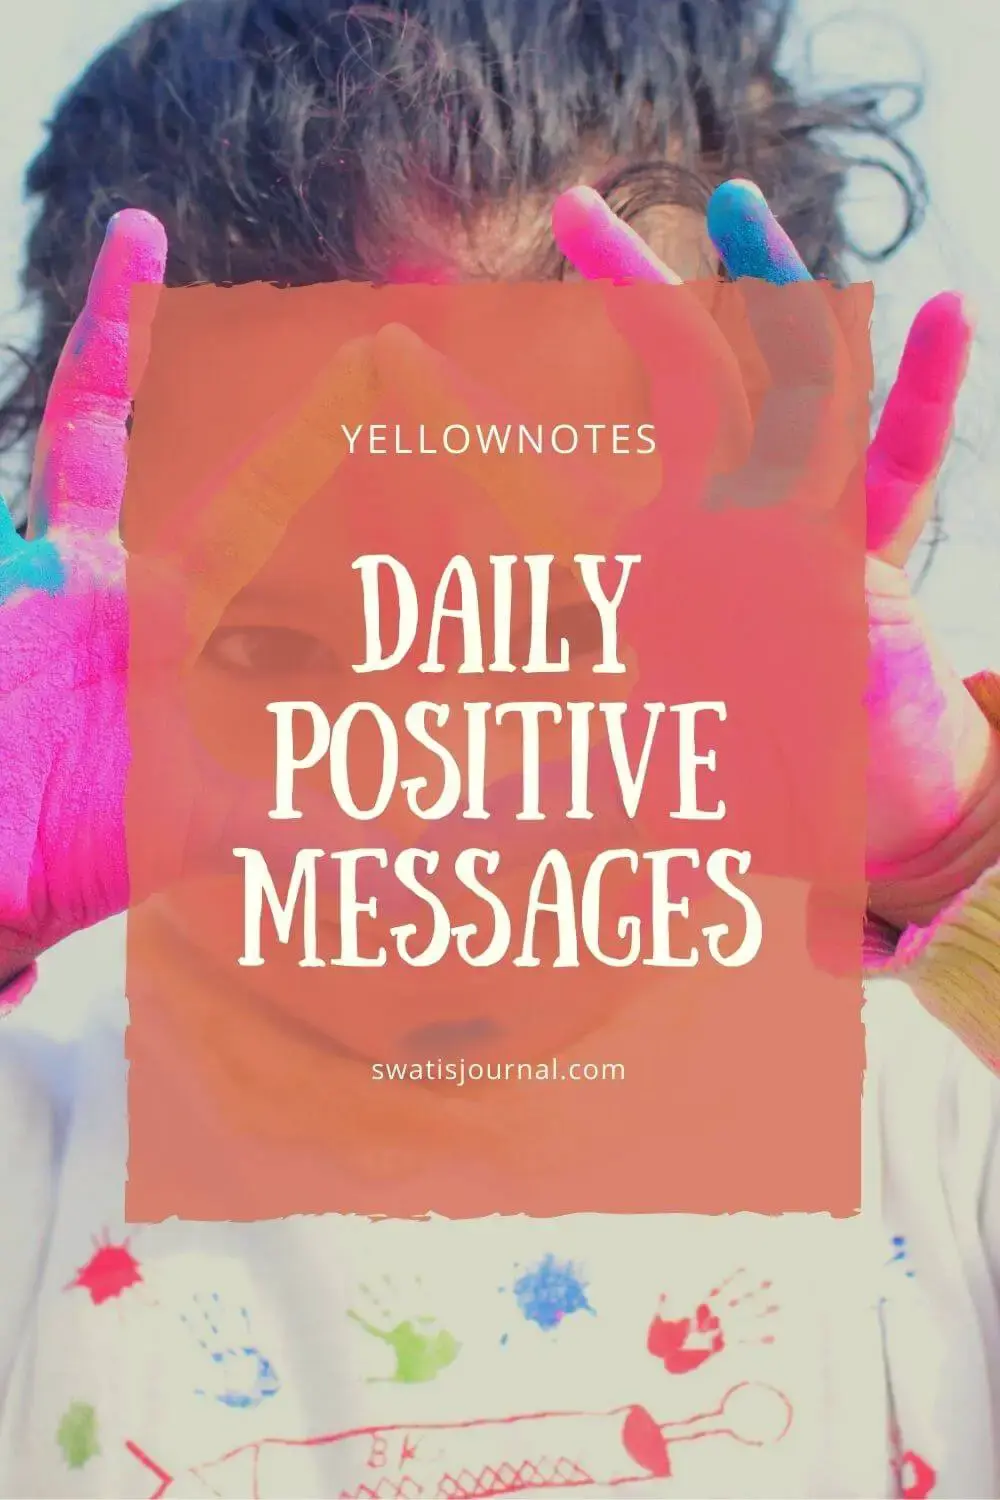 January 2020 - Daily Quotes - Yellownotes cover image